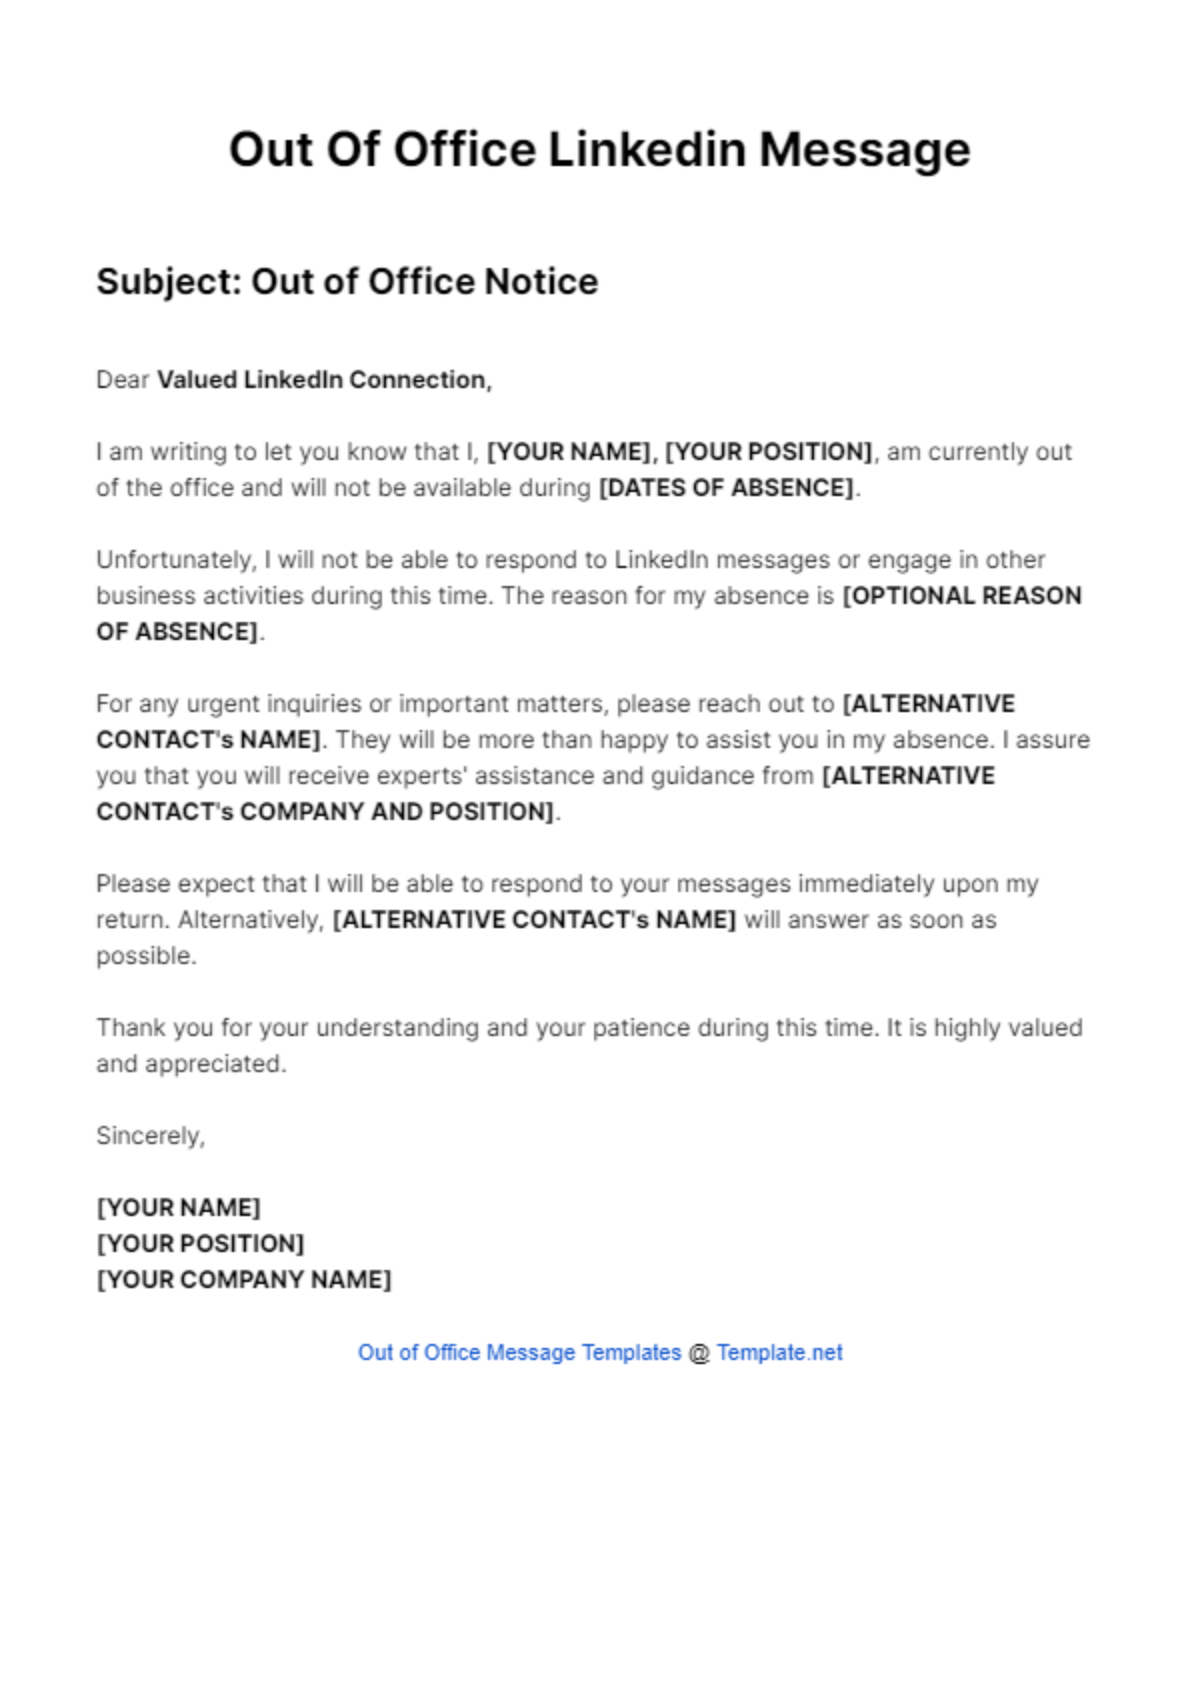 Free Out Of Office Linkedin Message Template